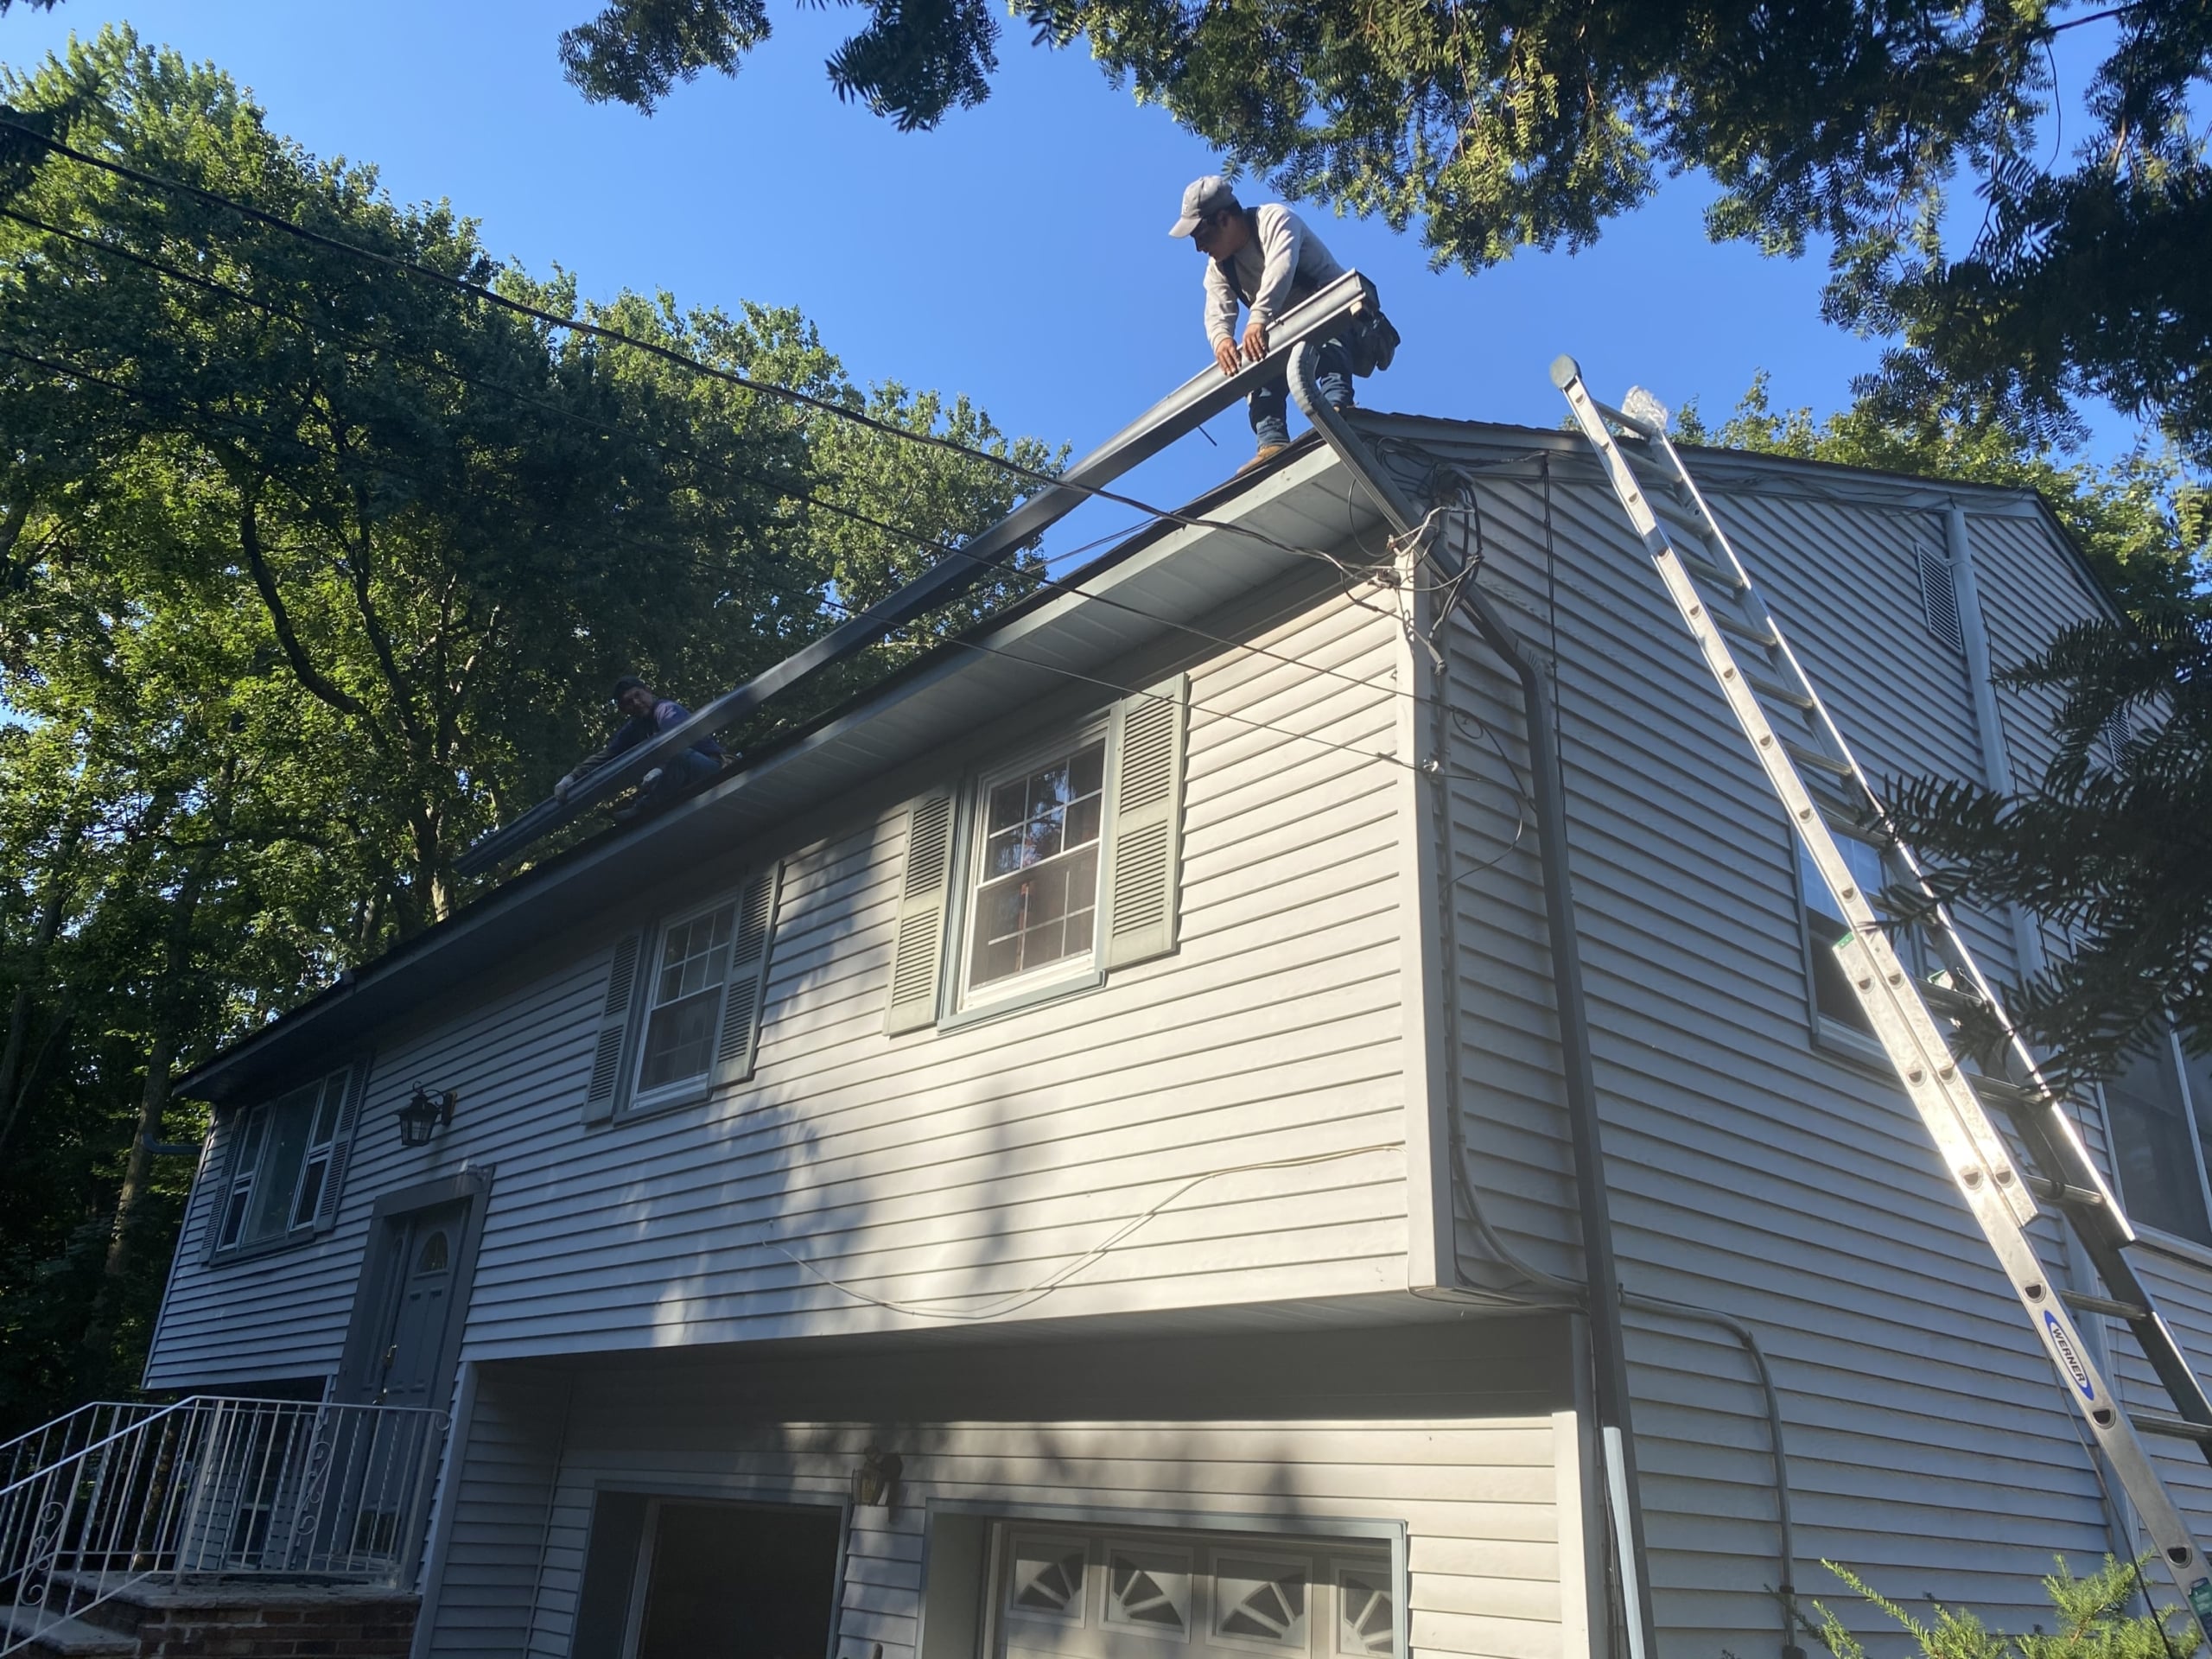 gutter replacement in bergen county by superior seamless gutters